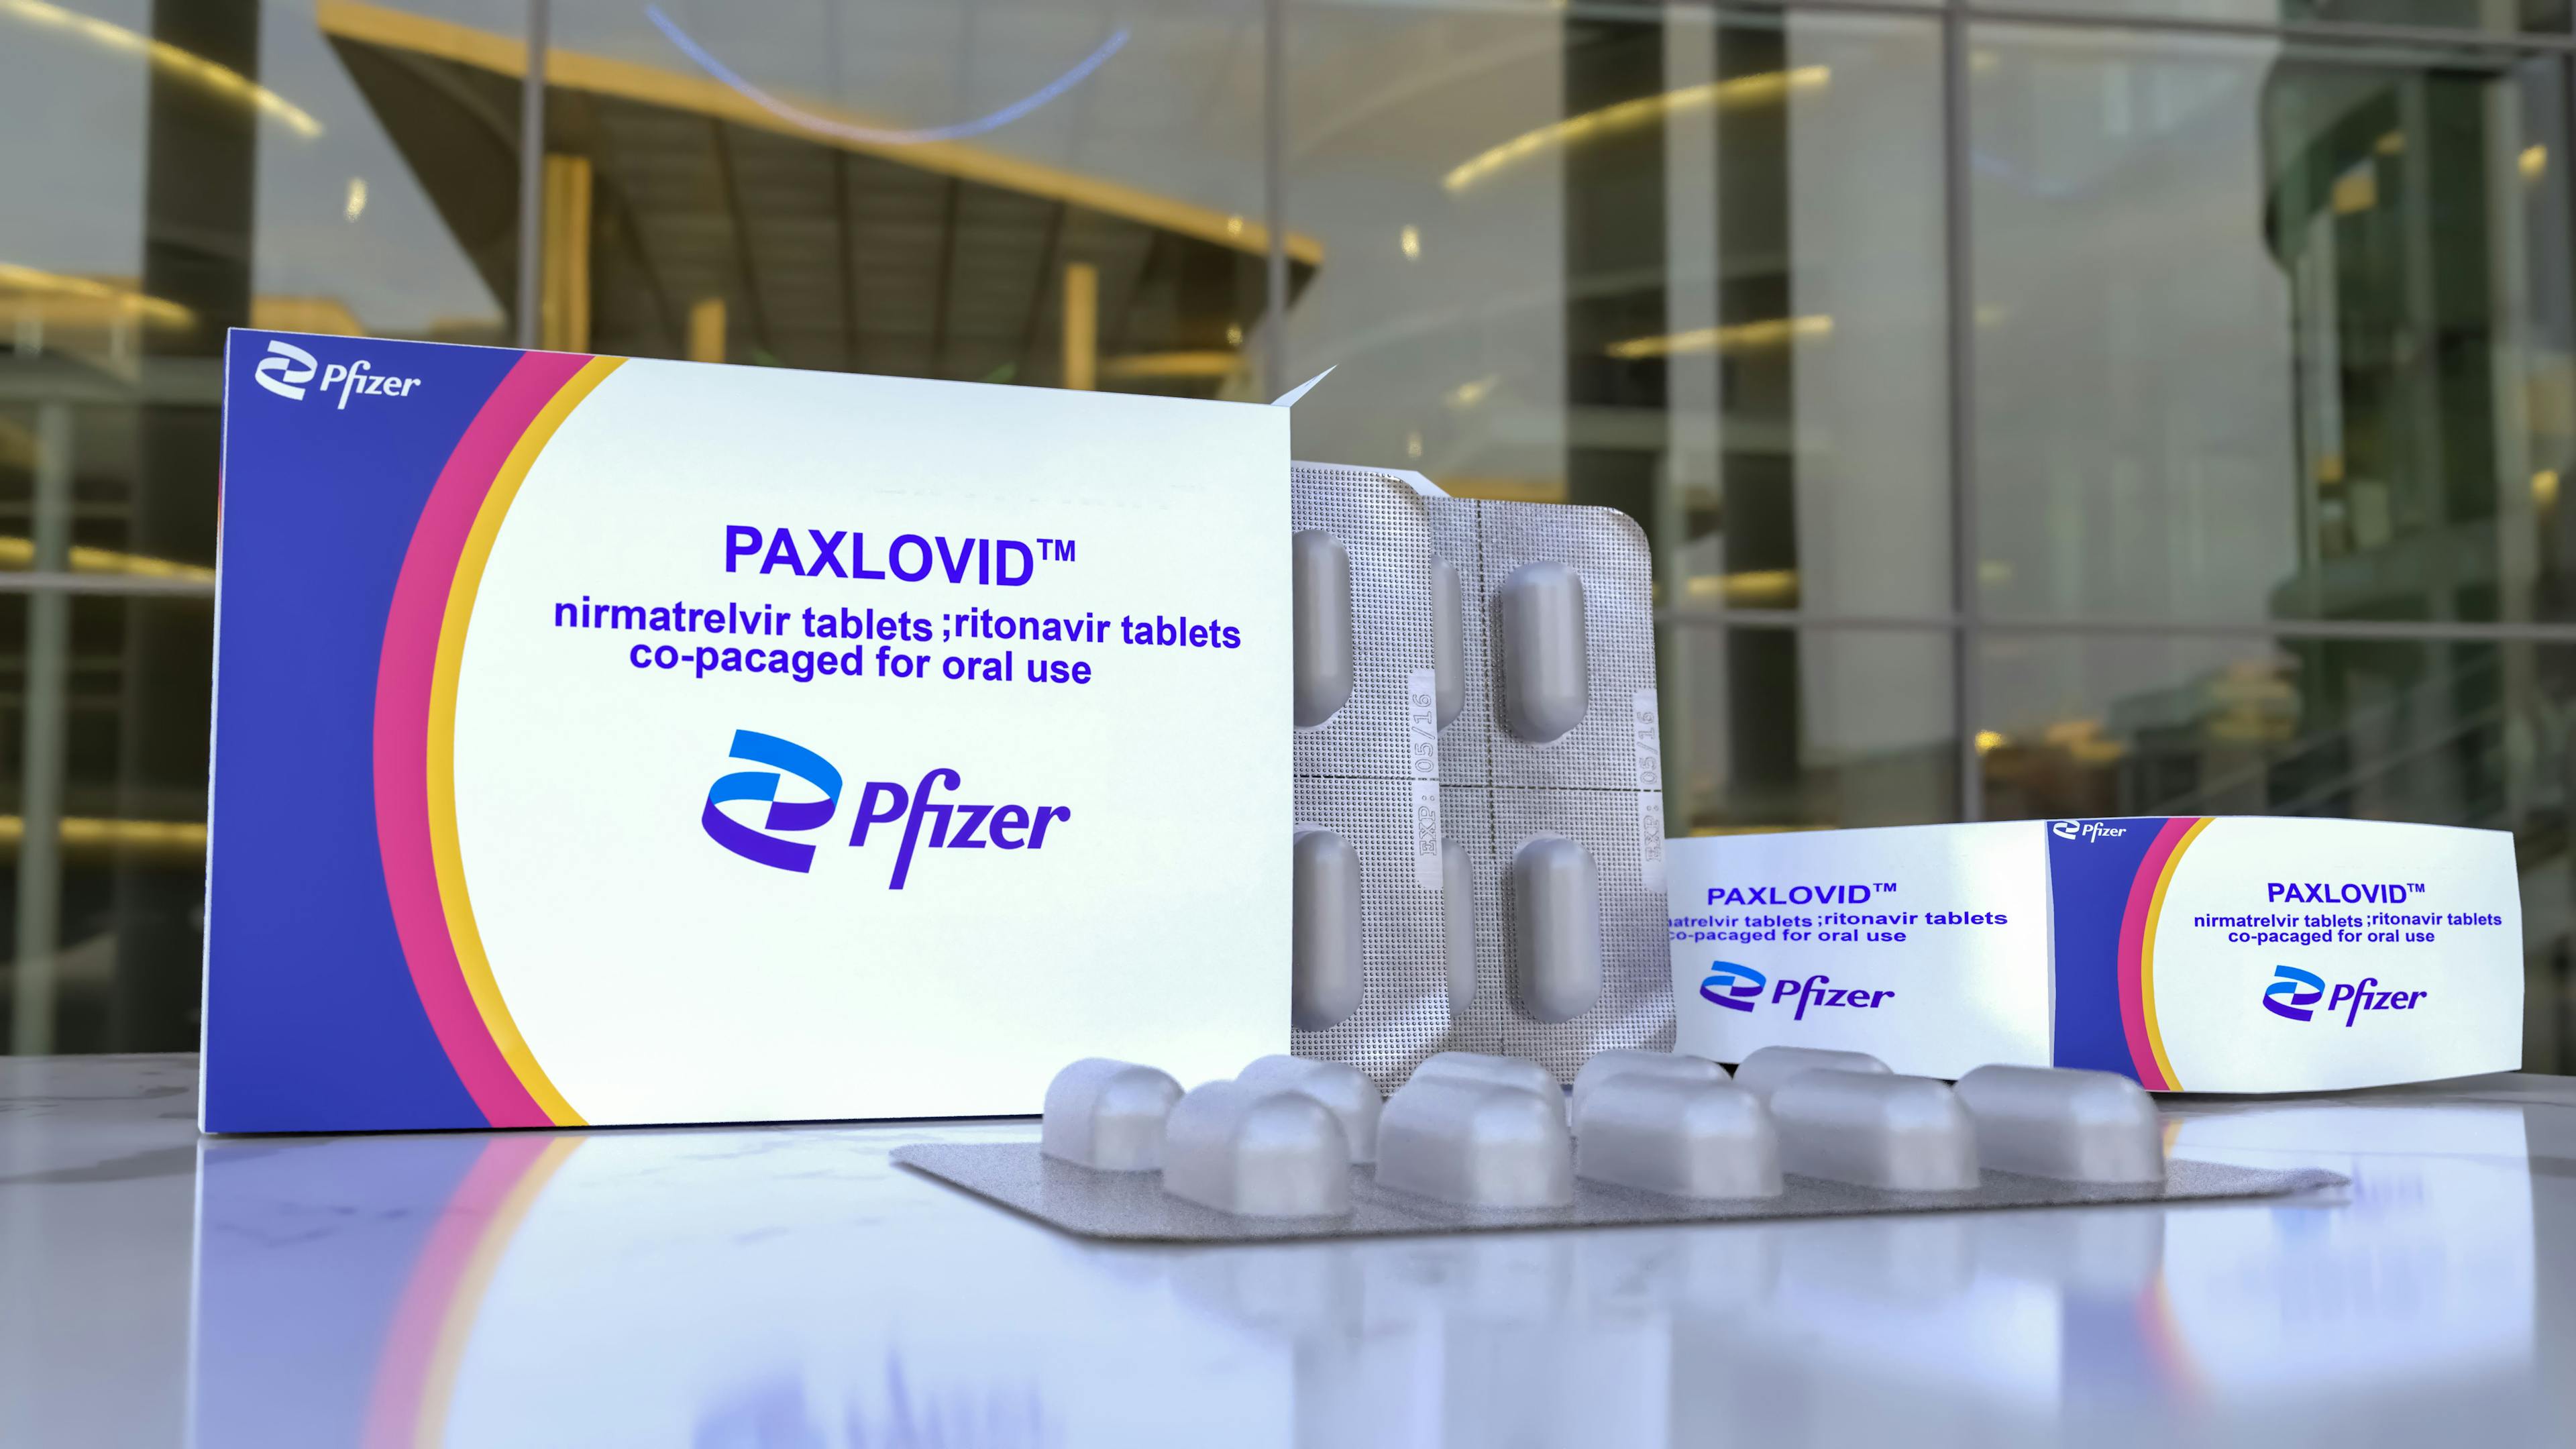 Paxlovid as first oral drug for COVID-19